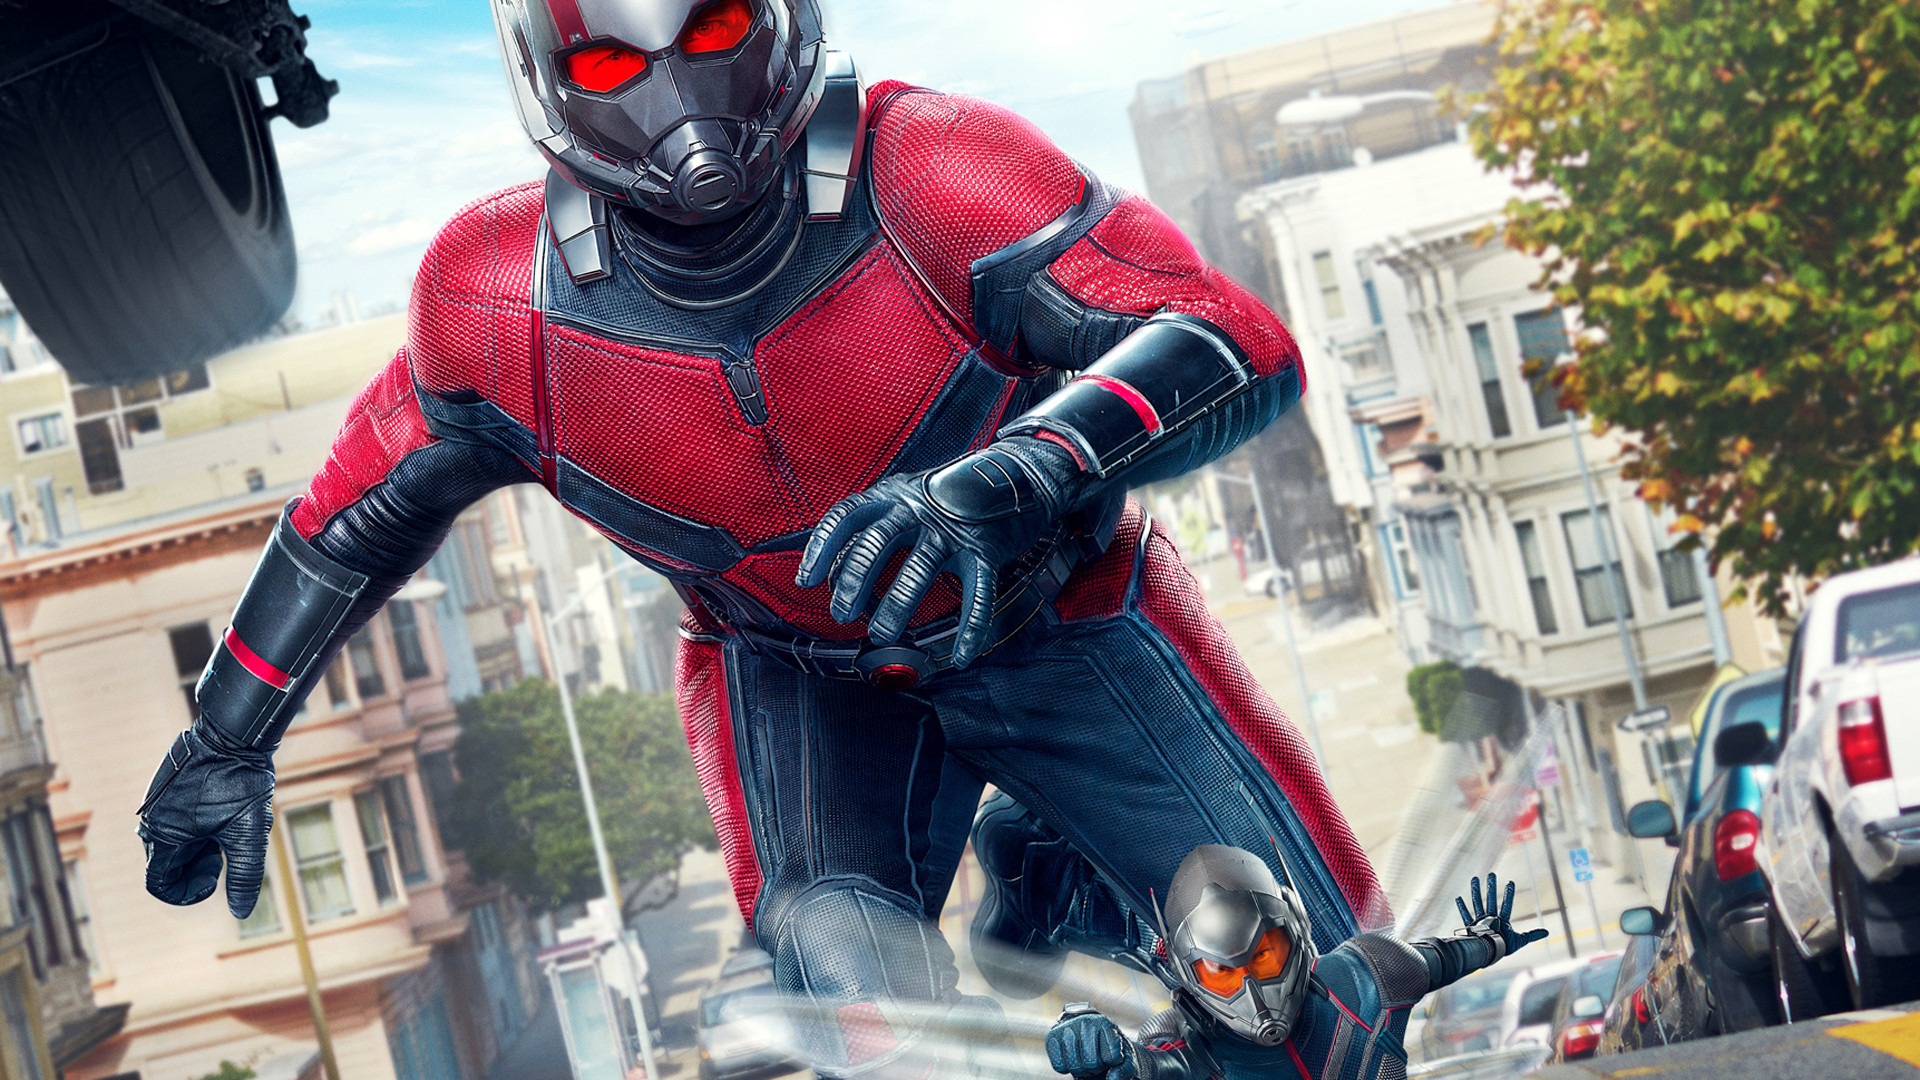 Ant Man And The Wasp Imax Poster, HD Movies, 4k Wallpapers, Image, Backgrou...